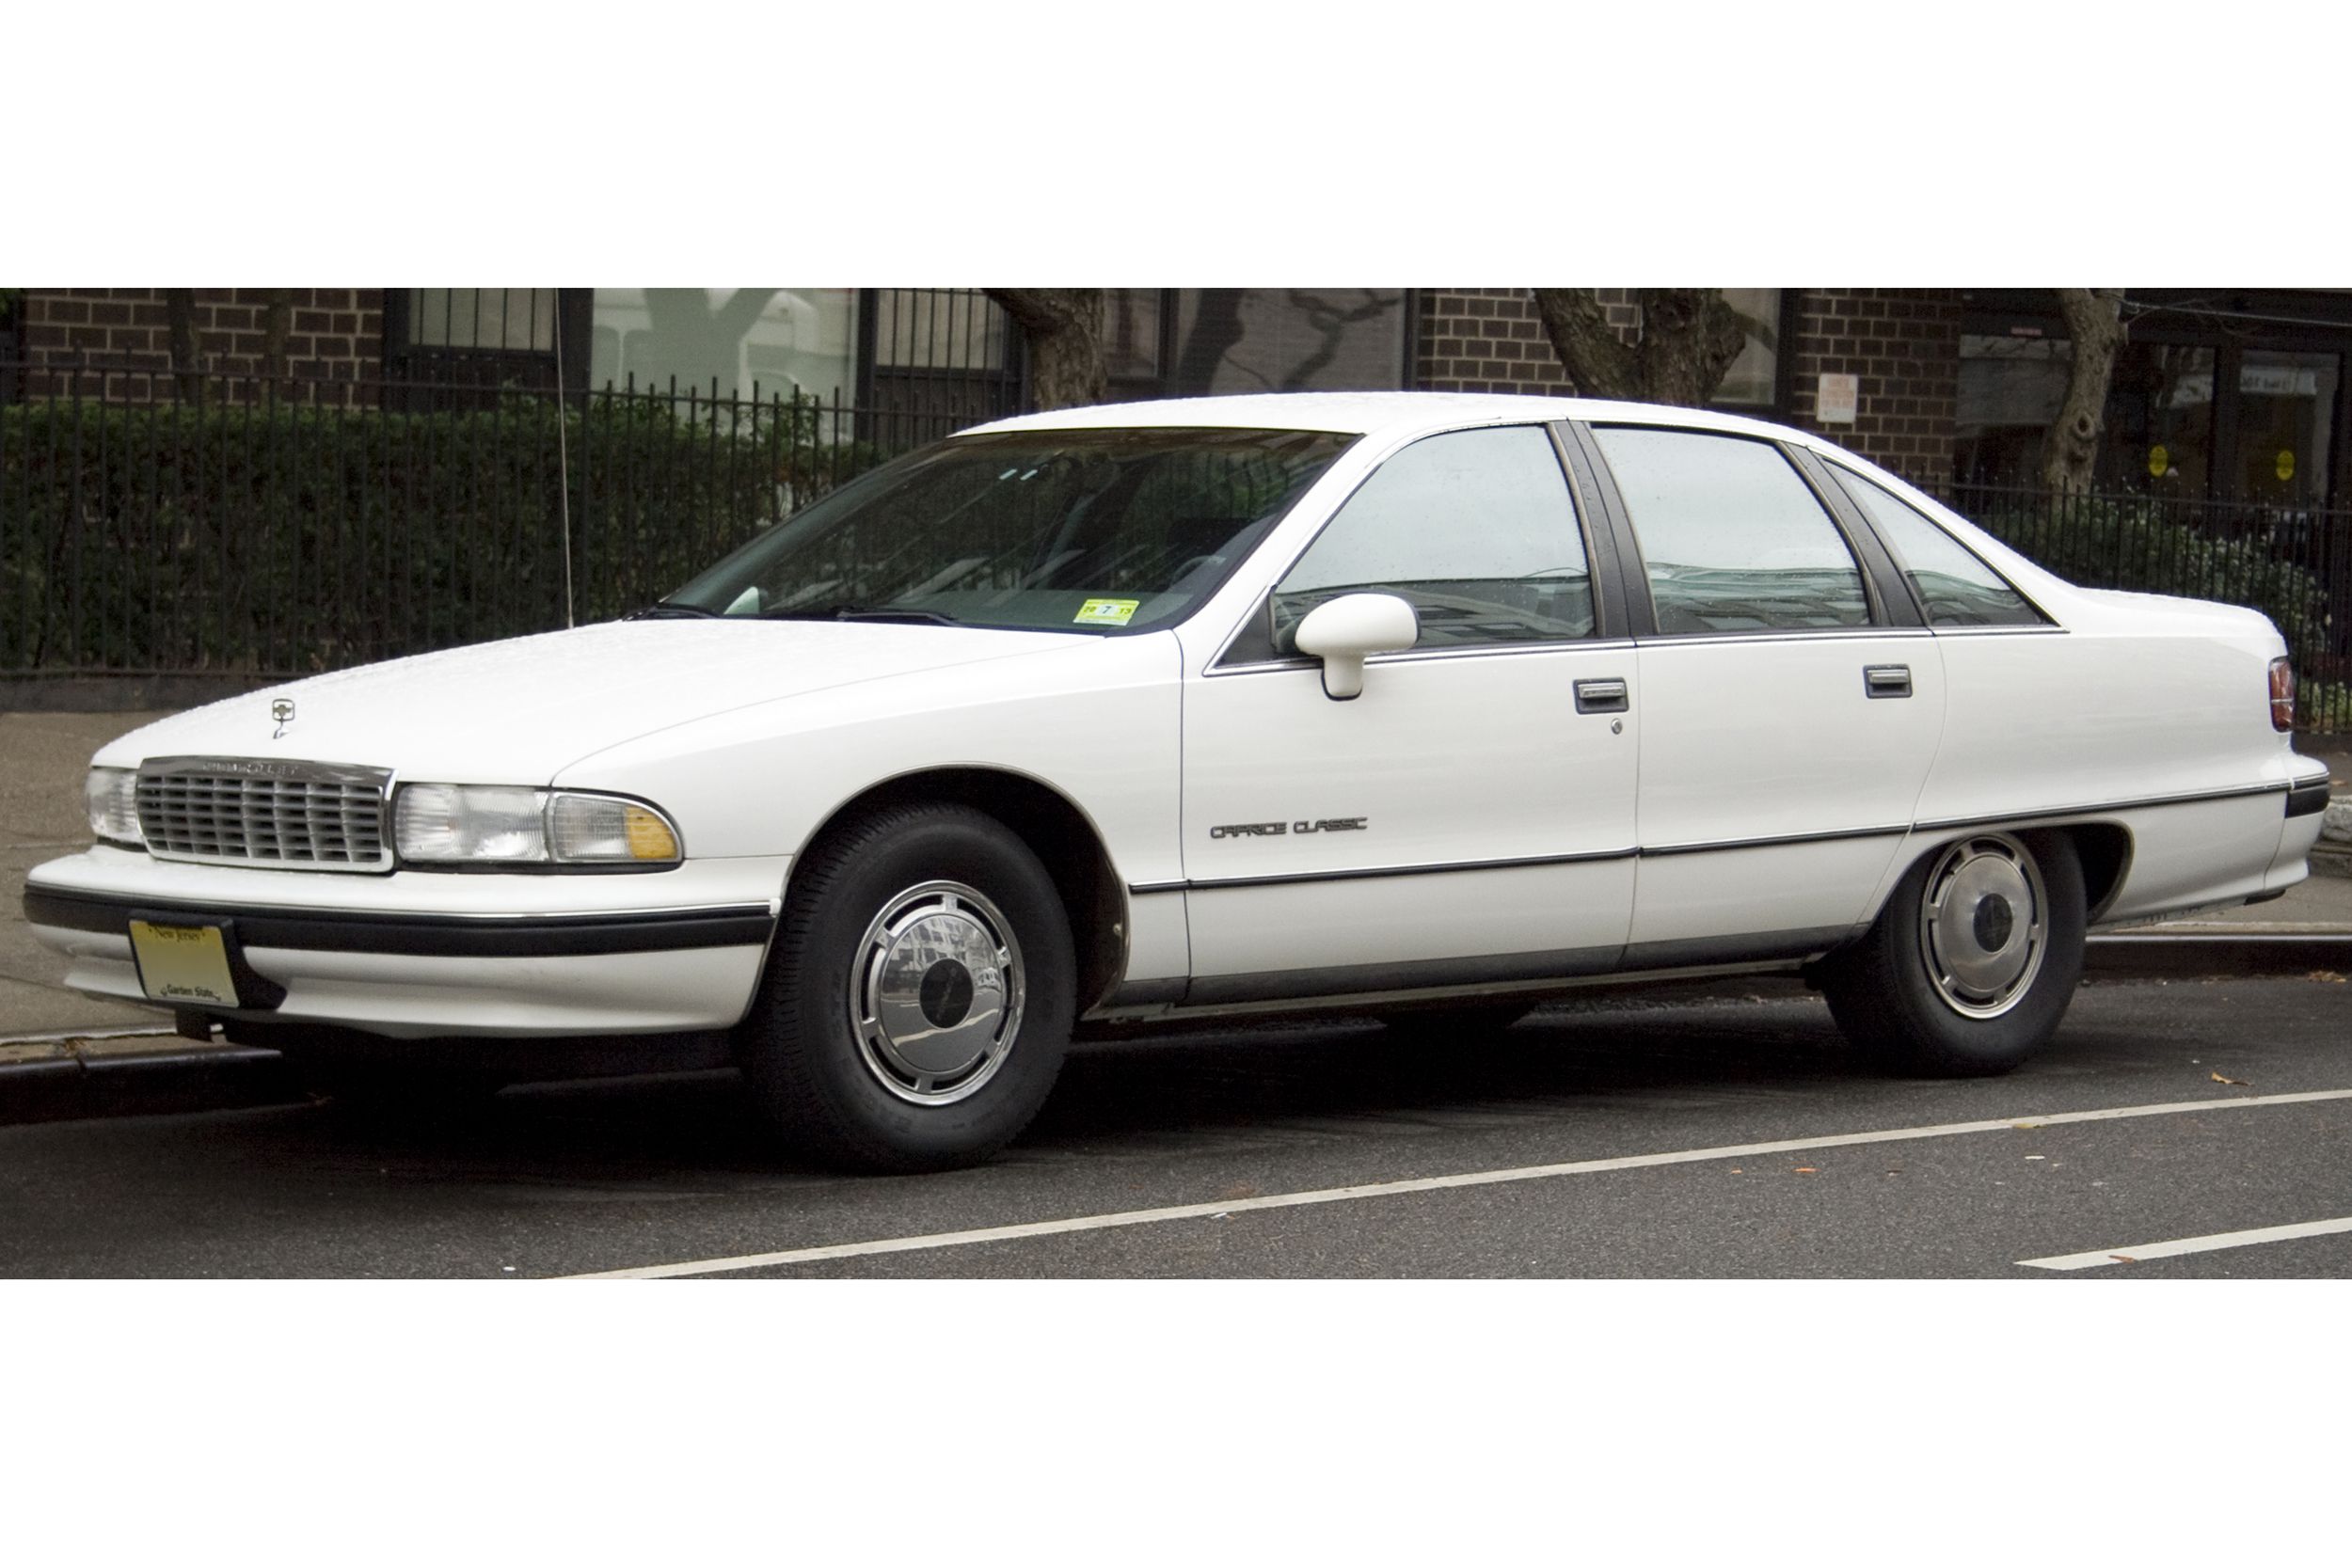 <p>"It looked like an upside-down bathtub," <a href="https://www.nytimes.com/1992/10/24/business/a-caprice-that-chevy-couldn-t-sell.html">admitted one GM worker</a> of the 1991 Chevrolet Caprice, a car that had built nearly a three-decade legacy of strong sales. But this redesigned full-size sedan was a bust. Fortune called it <a href="https://money.cnn.com/magazines/fortune/fortune_archive/1997/04/28/225531/index.htm">"a beached whale,"</a> while the slightly kinder Washington Post called it <a href="https://www.washingtonpost.com/archive/politics/1992/07/06/gm-misses-mark-with-bulky-caprice/f606436f-e087-43d7-8c89-d68aa81fadb9/">"bulbous."</a> However you describe it, sales were disappointing, and it lasted only a couple of years before getting a face lift.</p>